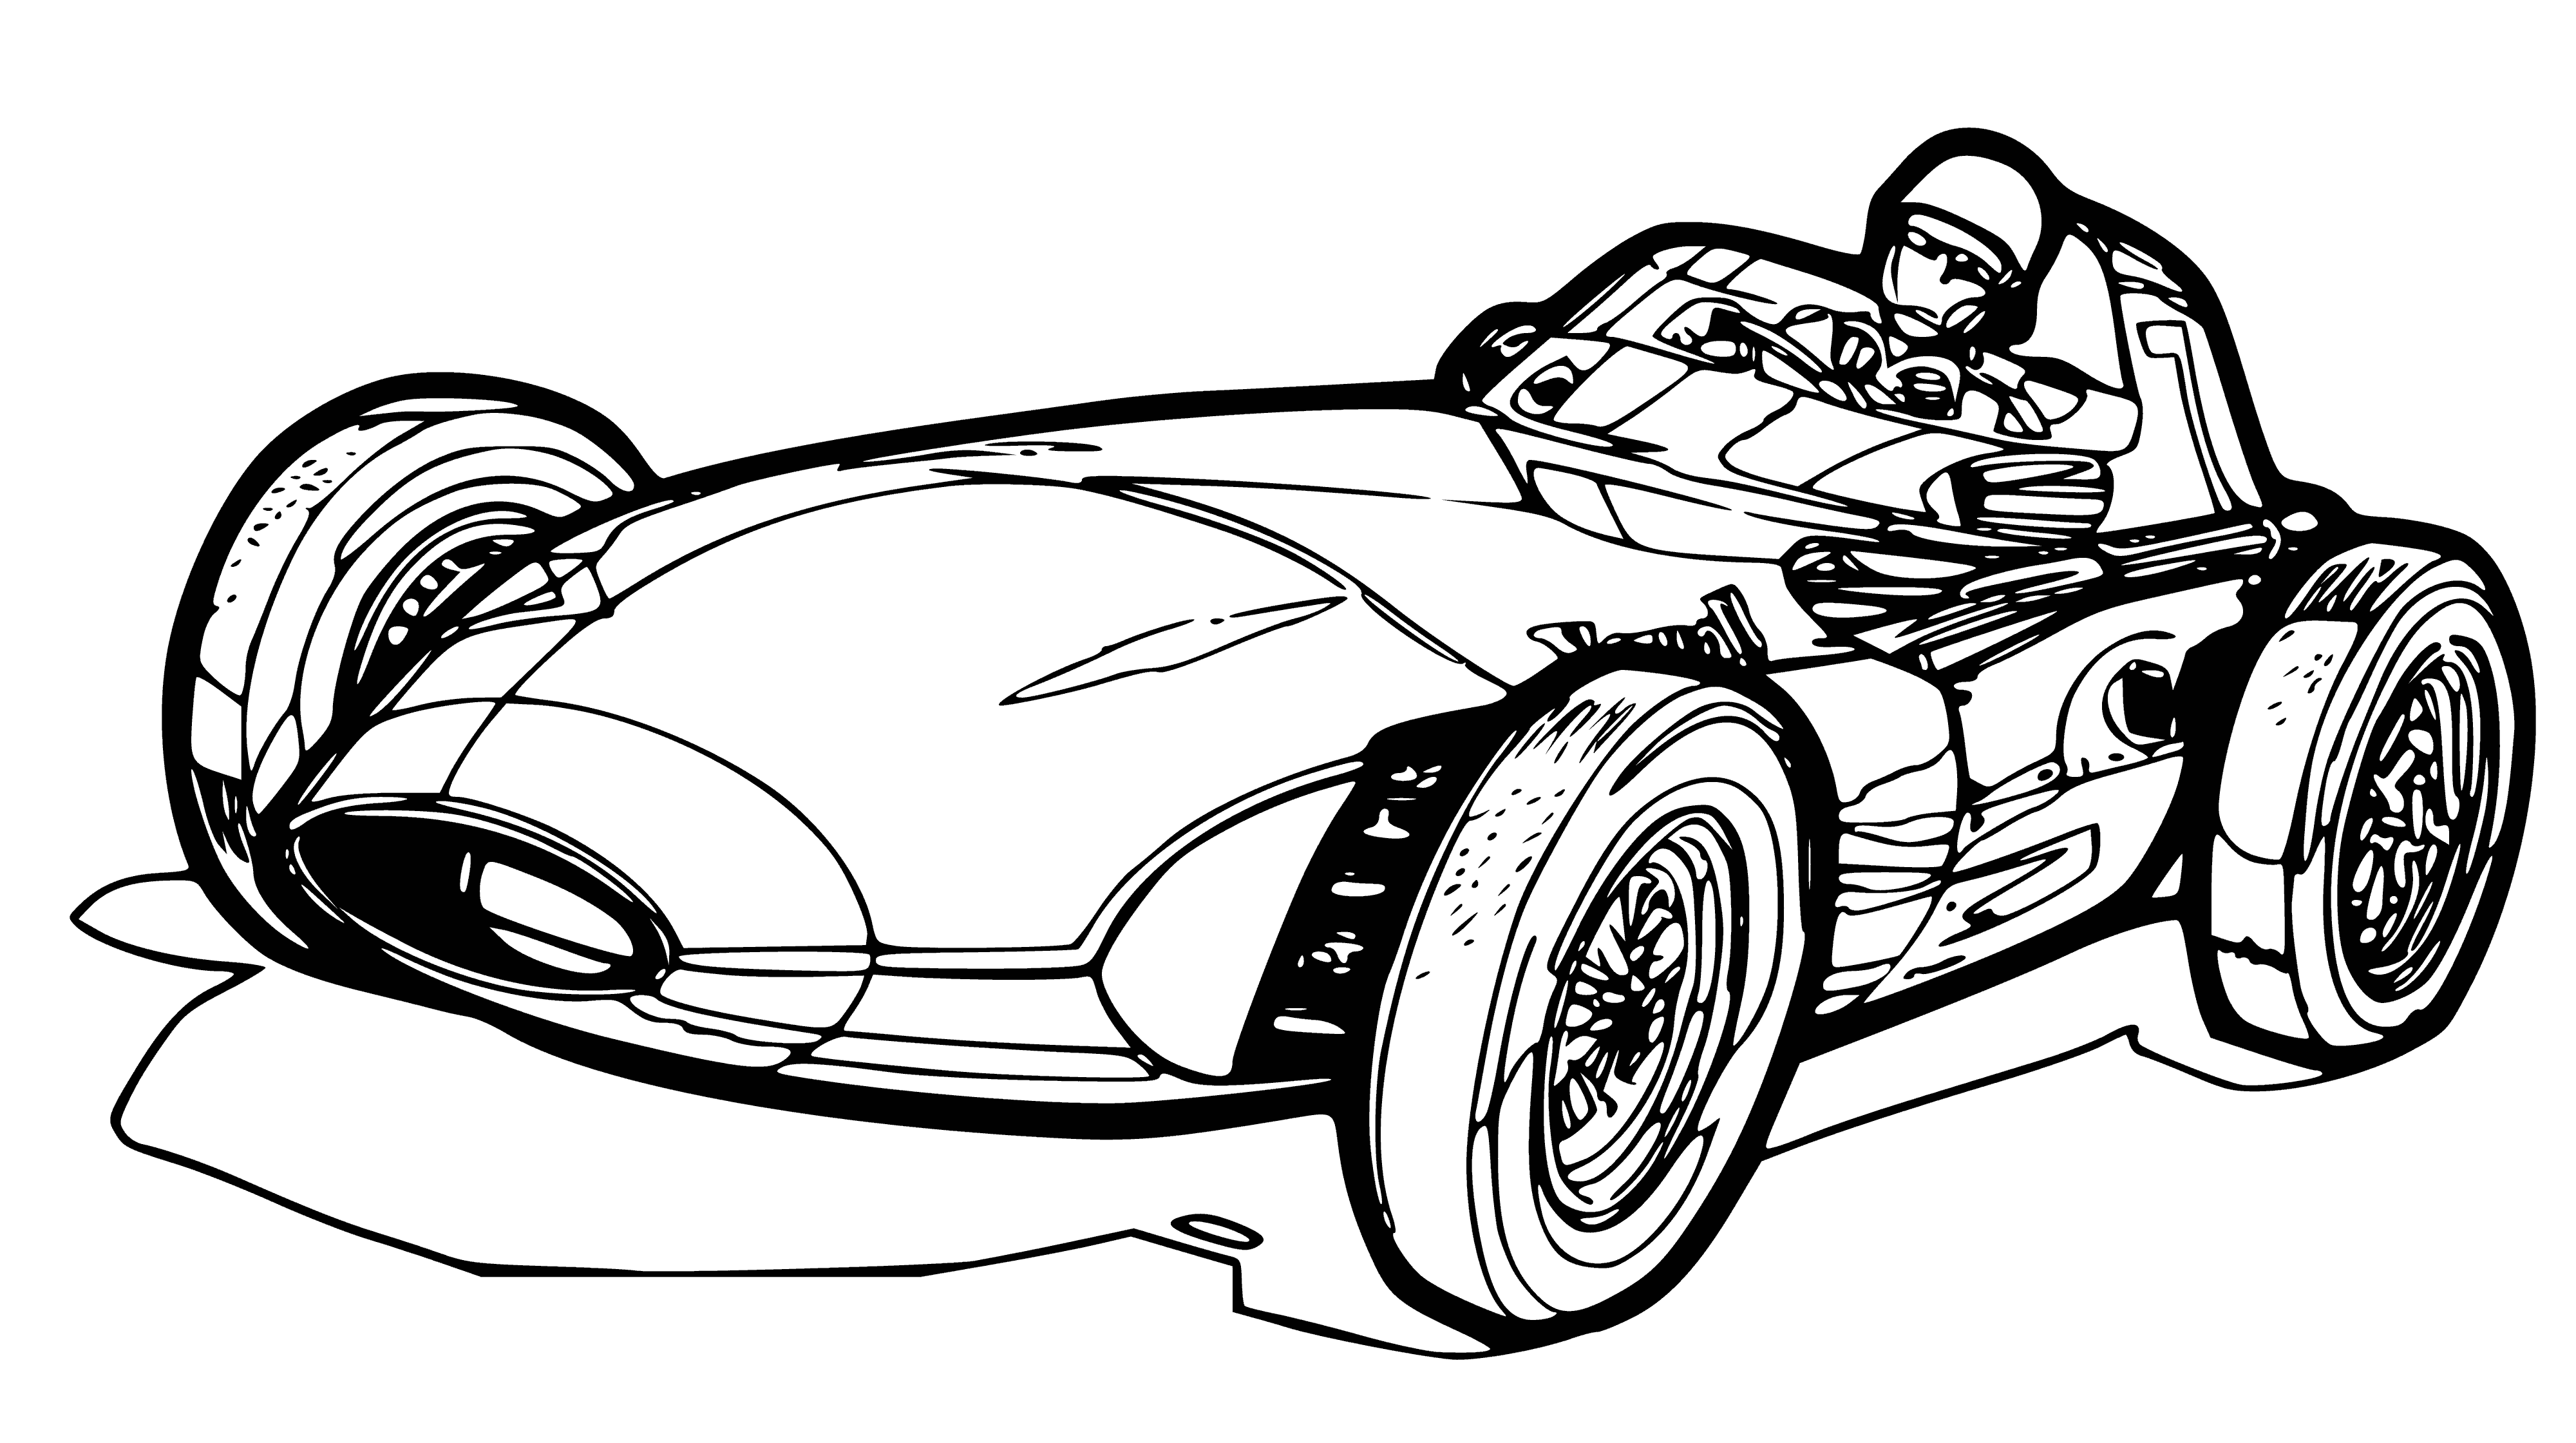 1958 coloring page